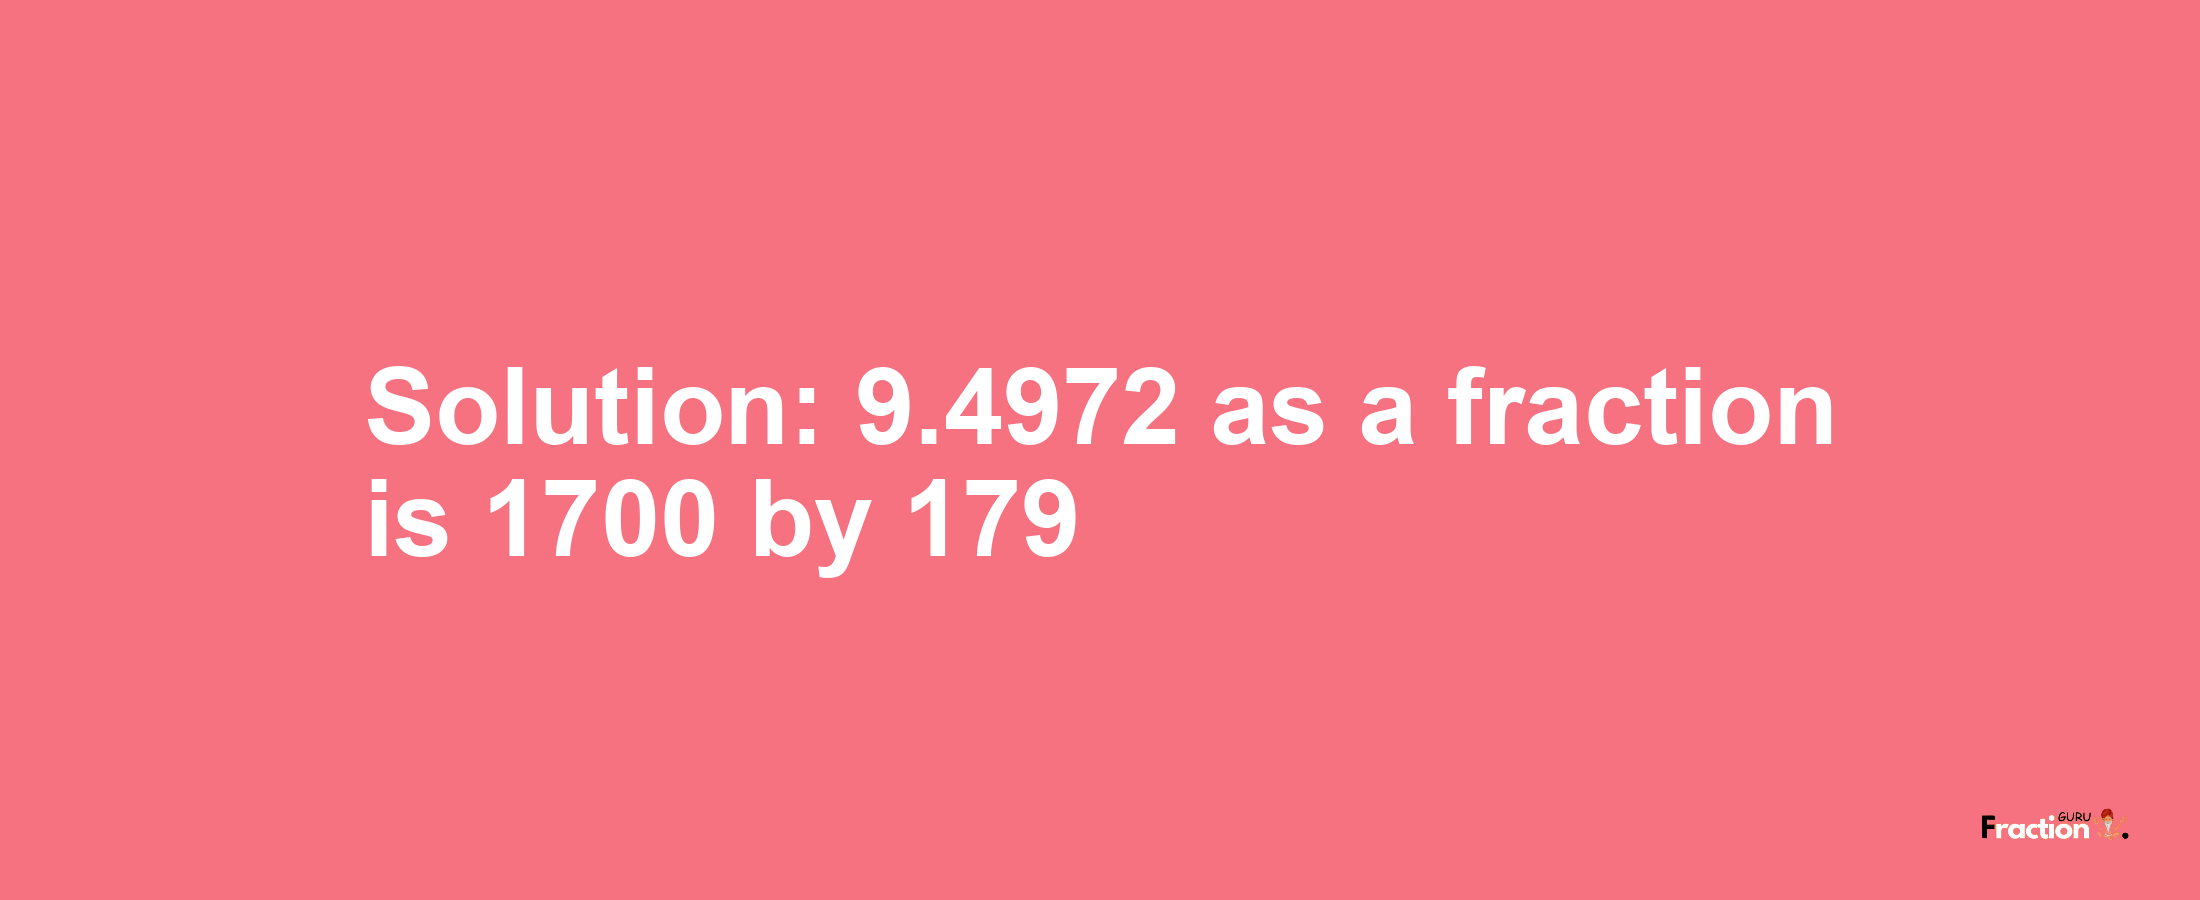 Solution:9.4972 as a fraction is 1700/179